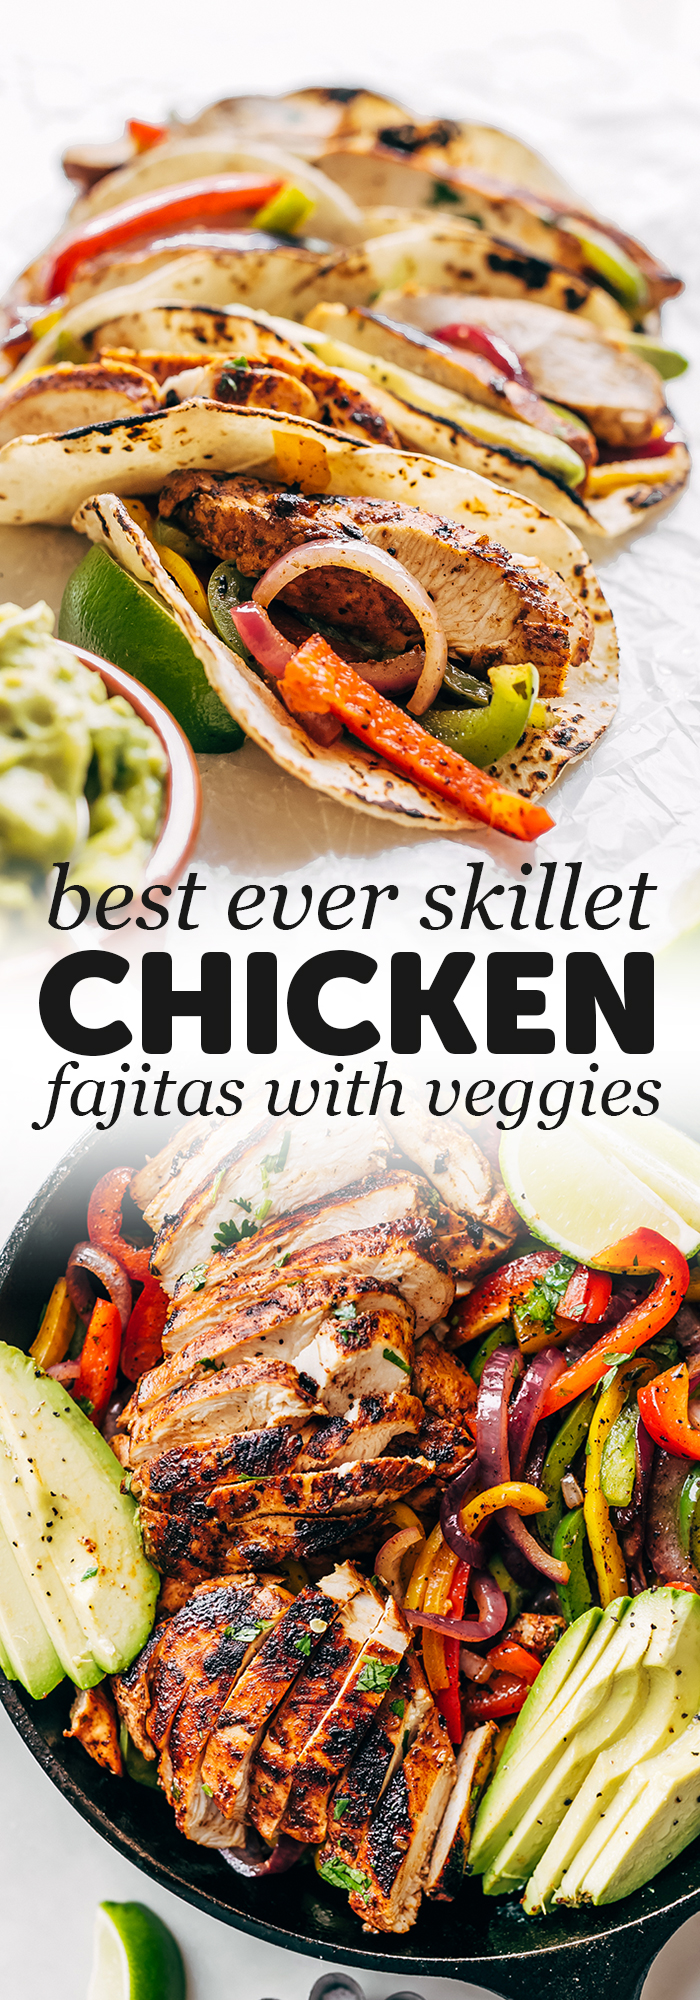 Best Ever Chicken Fajitas - skip the seasoning packets and learn how to make the BEST chicken fajitas as home with easy to find ingredients! These fajitas are so good you'll never buy the packet seasoning again! #chickenrecipes #chickenfajitas #fajitas #grilledfajitas | Littlespicejar.com